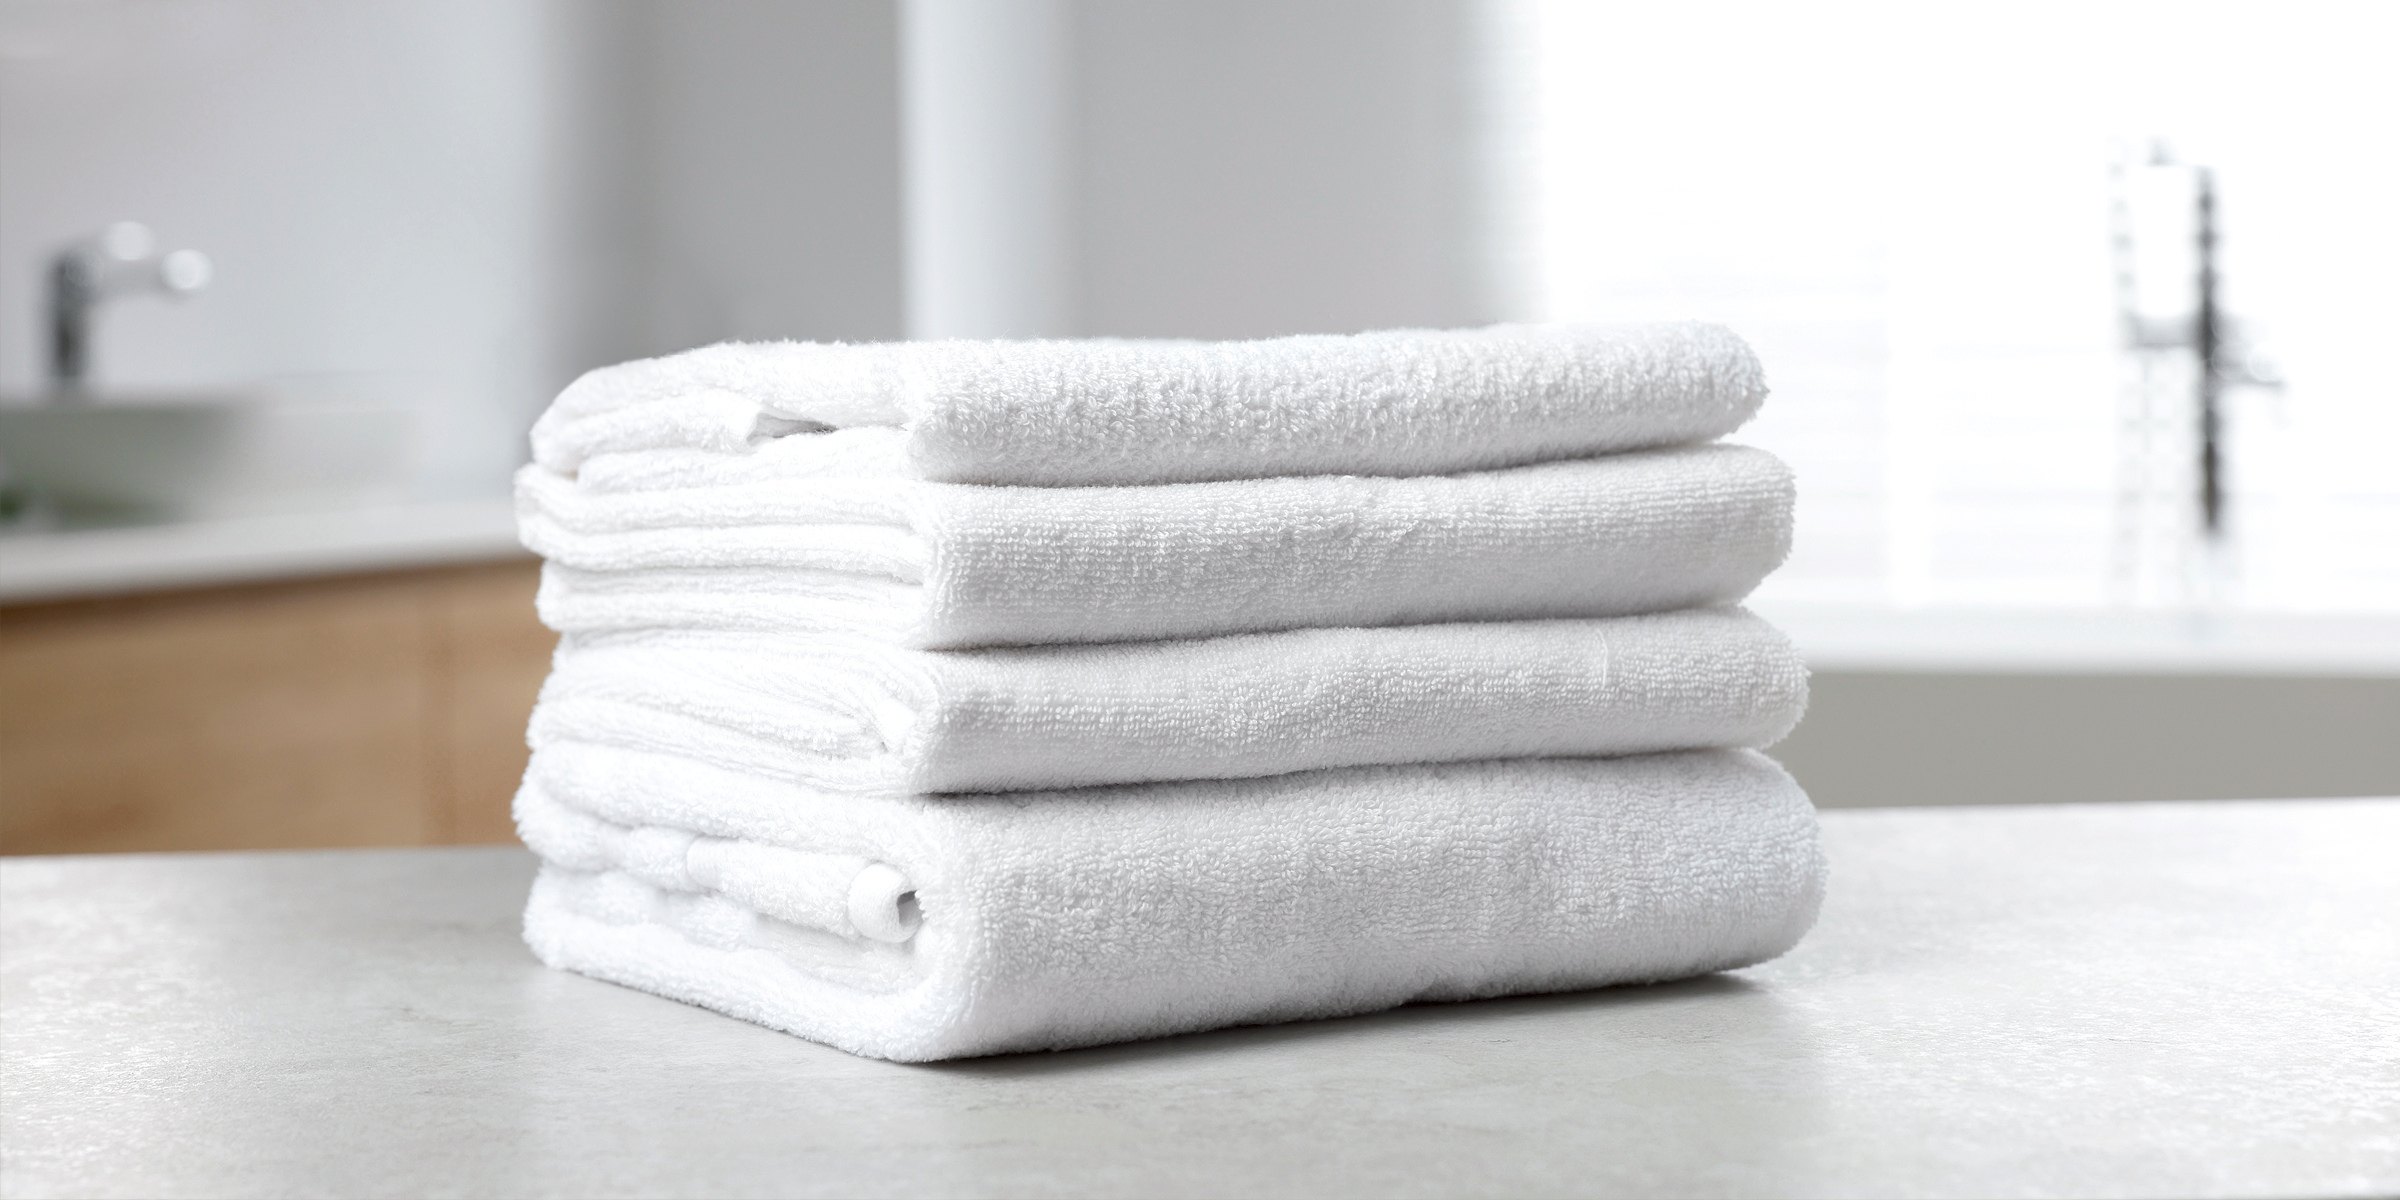 White towels. | Source: Shutterstock